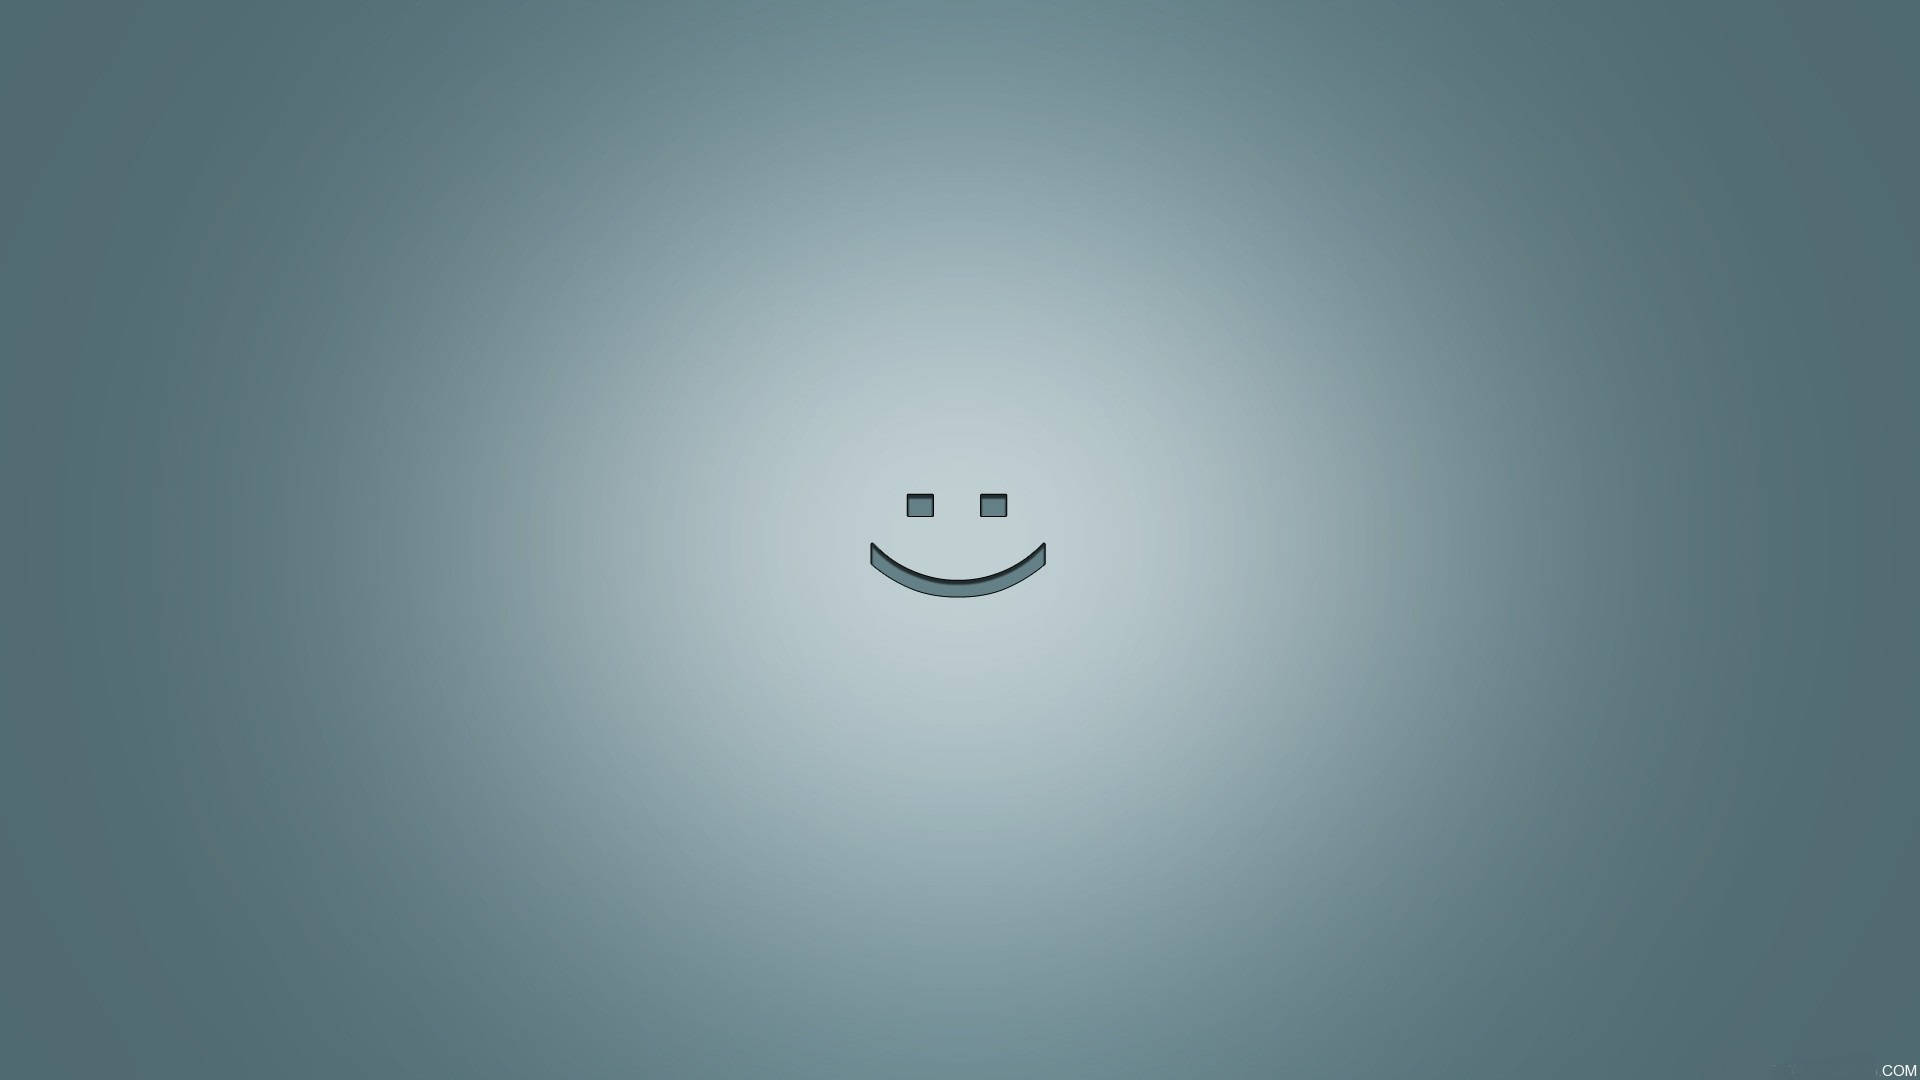 Smiley Face On Gray Gradient Background